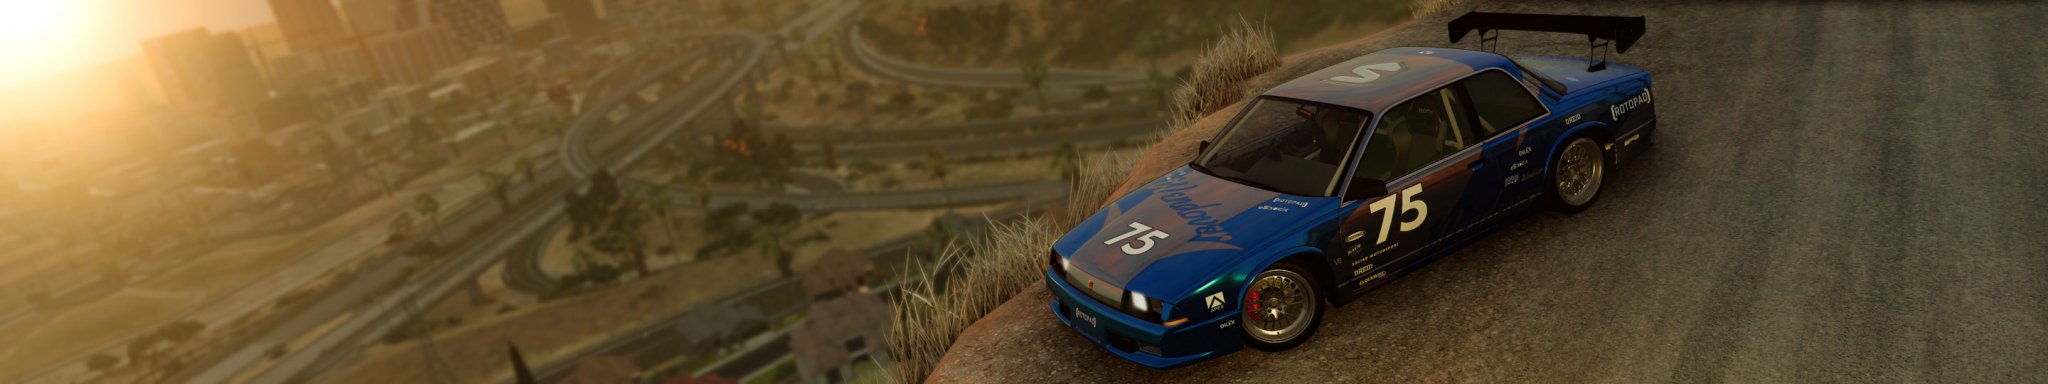 1 BeamNG Soliad Wendover RACE Supcharger copy.jpg